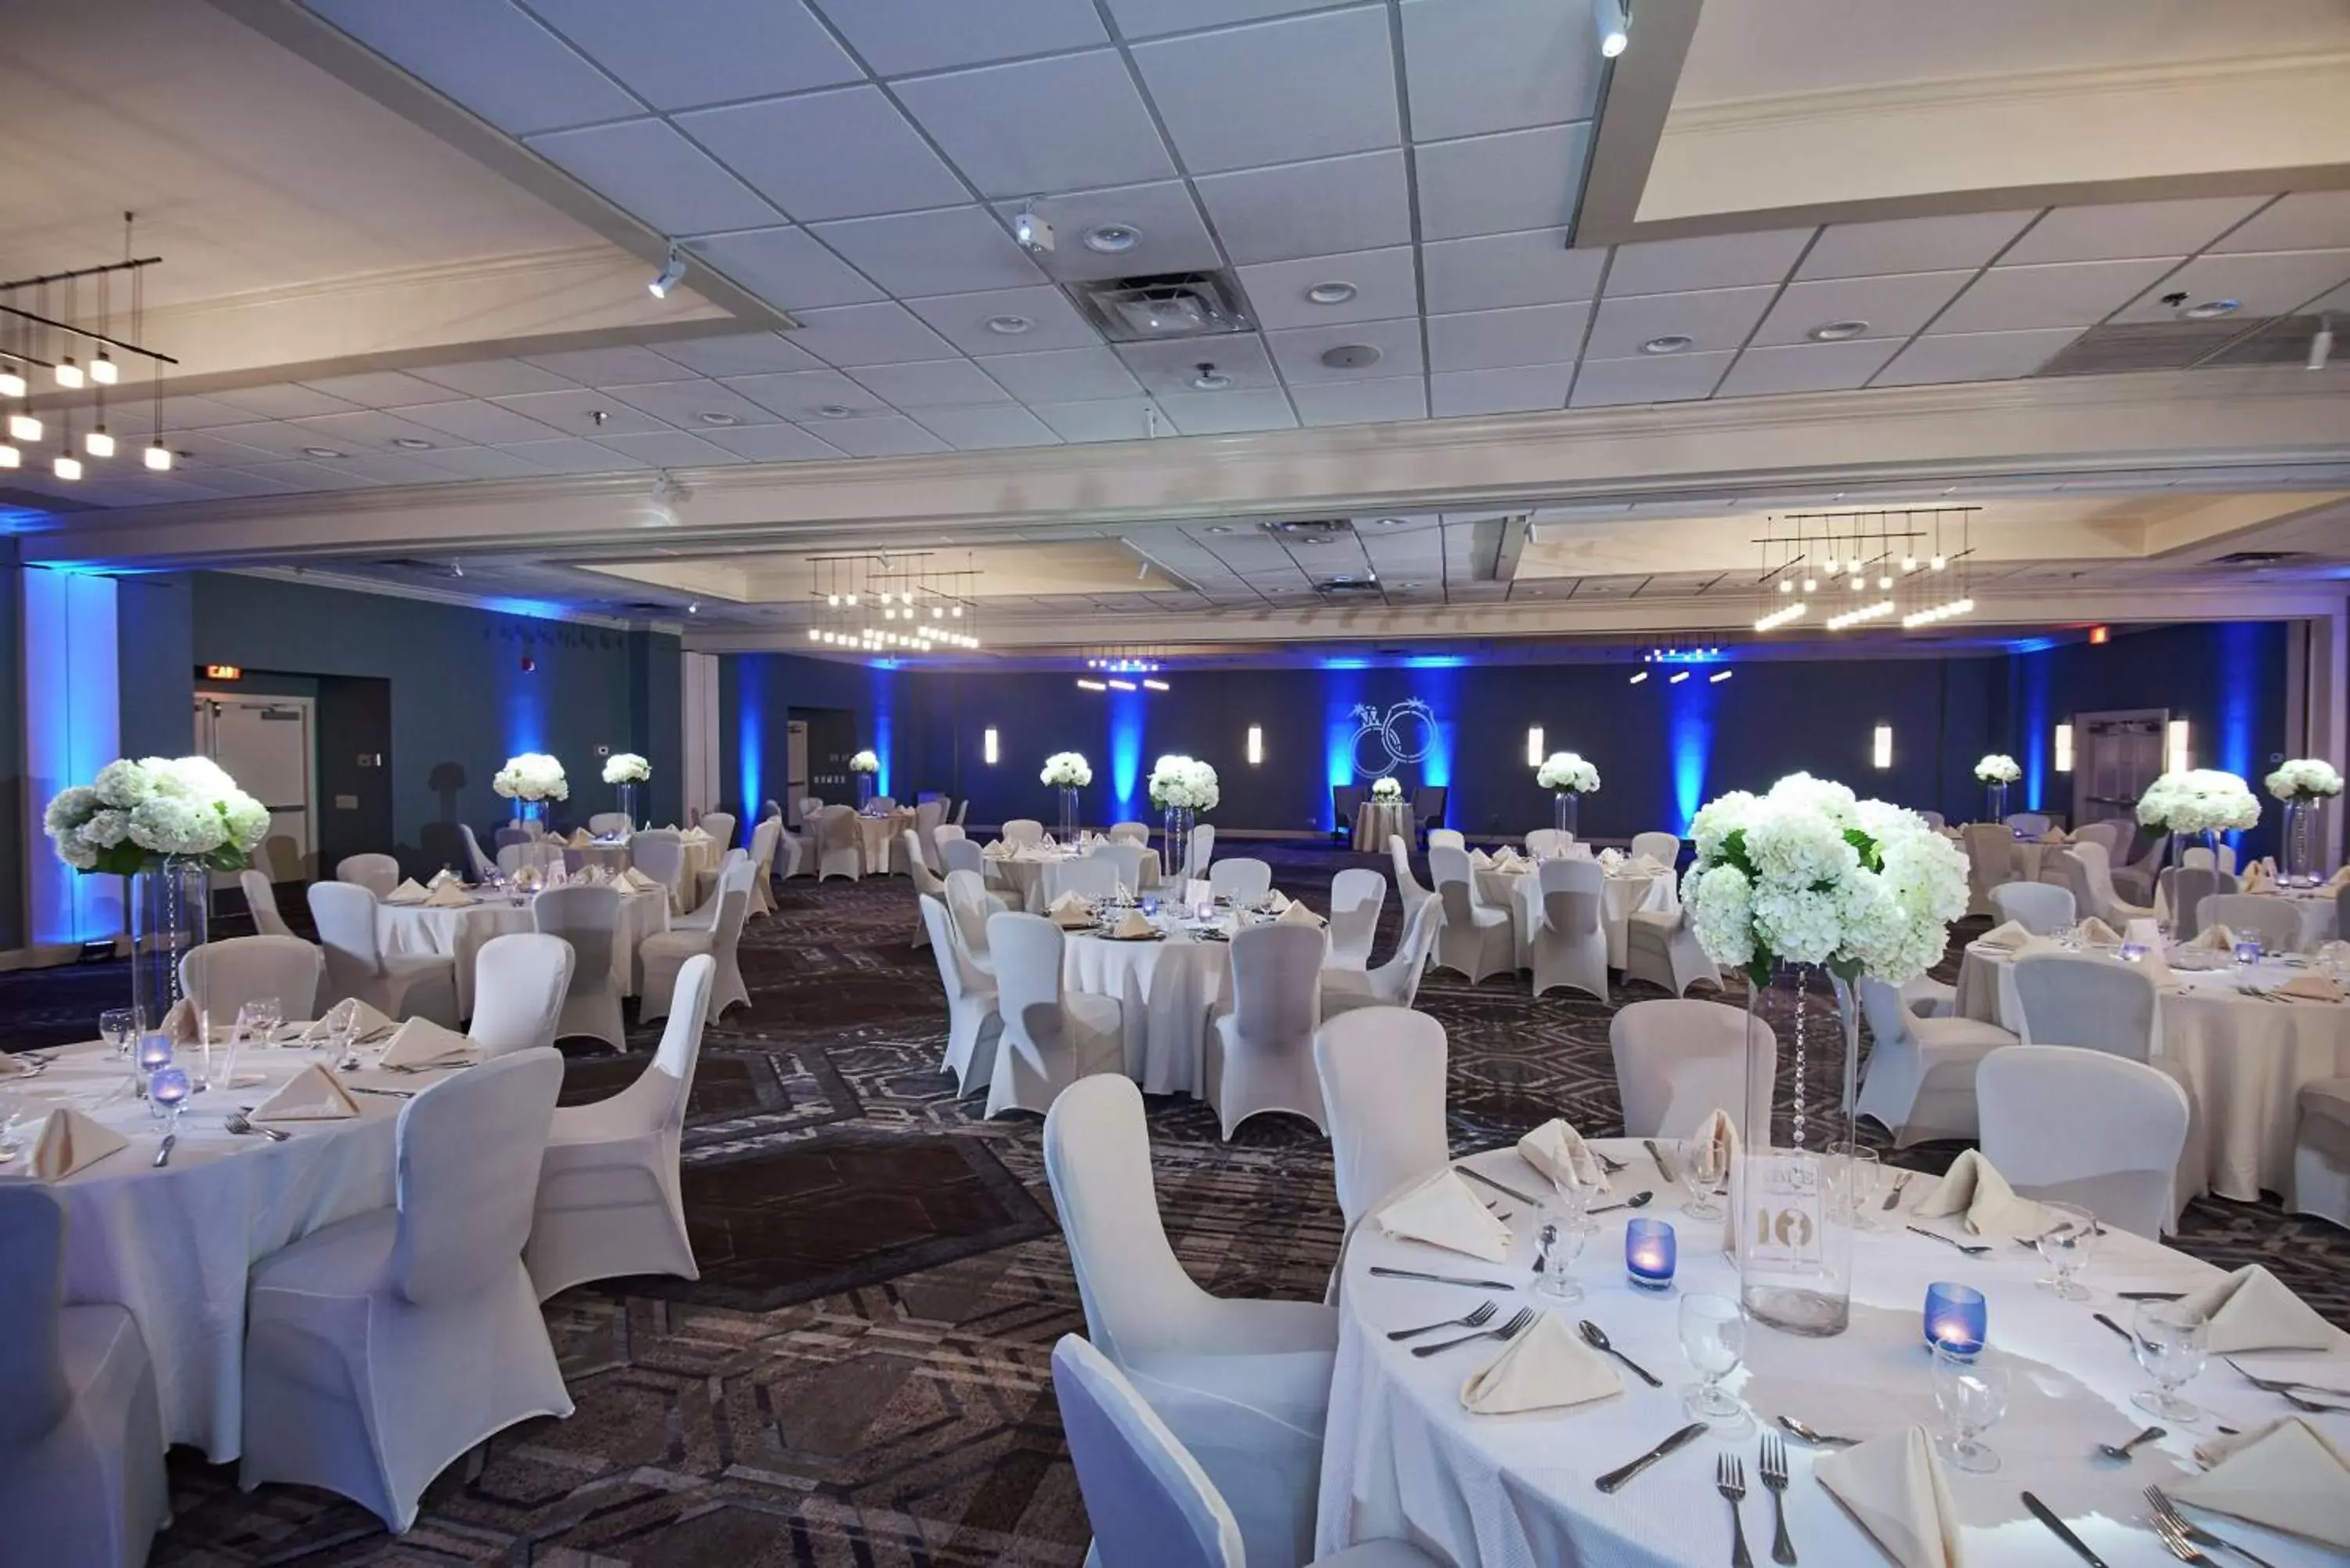 Meeting/conference room, Banquet Facilities in DoubleTree by Hilton Princeton